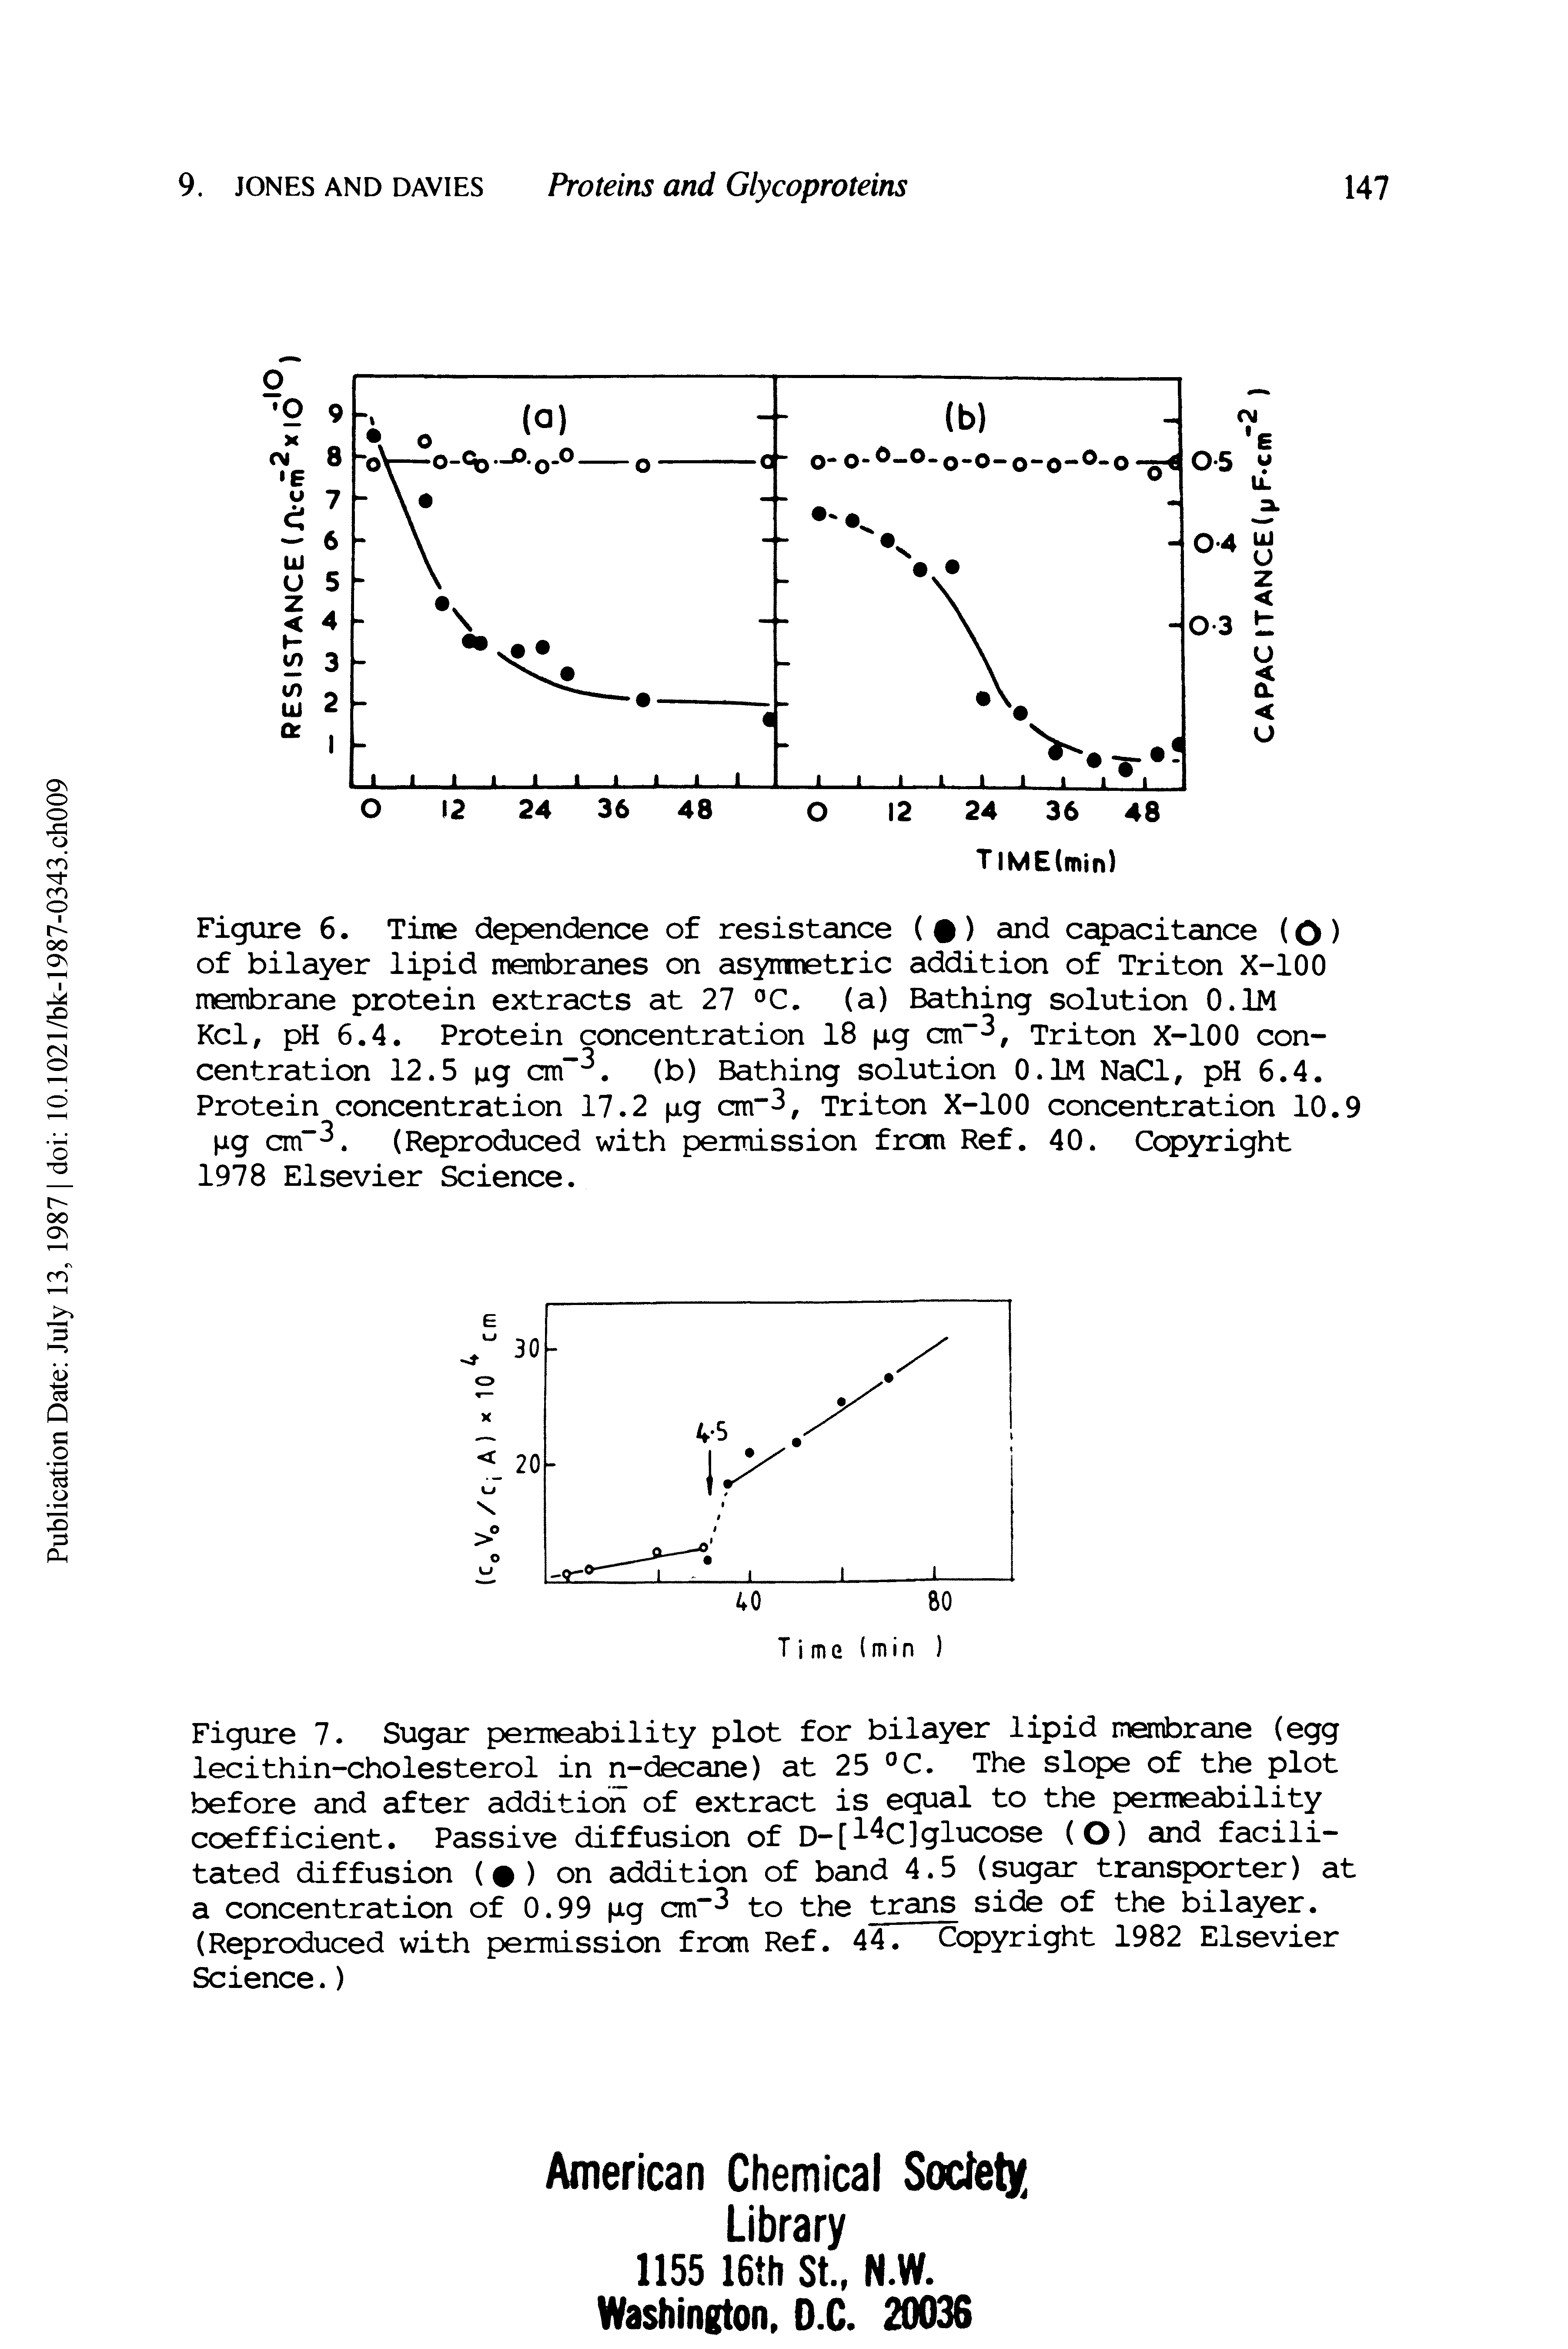 Figure 7. Sugar permeability plot for bilayer lipid membrane (egg lecithin-cholesterol in n-decane) at 25 °C. The slope of the plot before and after addition of extract is equal to the permeability coefficient. Passive diffusion of D-[ C]glucose (O) and facilitated diffusion ( ) on addition of band 4.5 (sugar transporter) at a concentration of 0.99 (Jig cm to the trans side of the bilayer. (Reproduced with permission from Ref. 44. Copyright 1982 Elsevier Science.)...